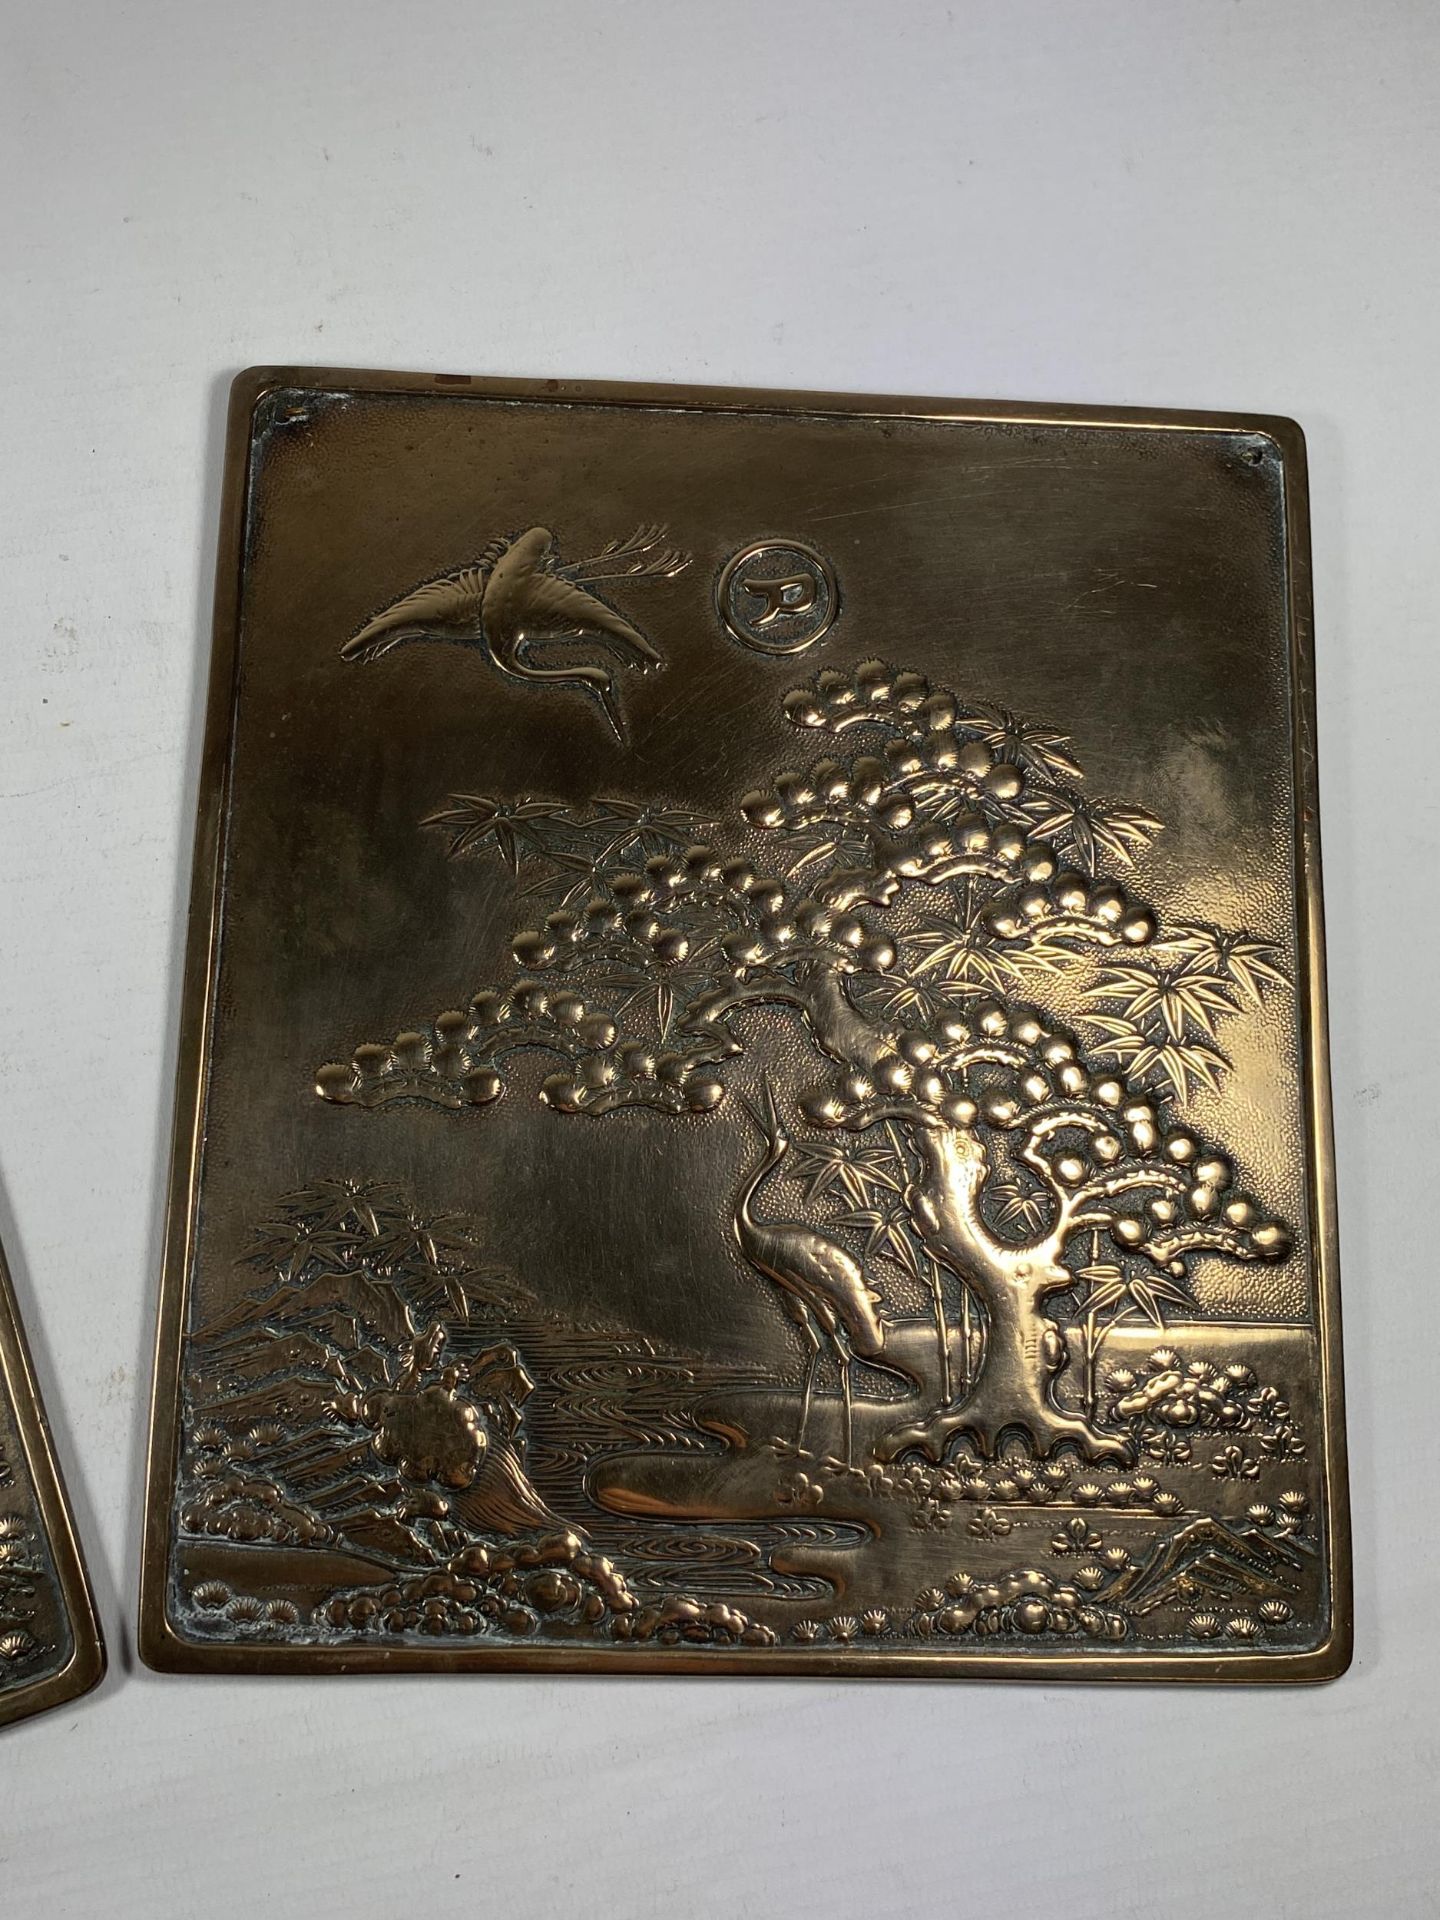 A PAIR OF JAPANESE MEIJI PERIOD (1868-1912) HEAVY BRONZE MIRROR PLAQUES WITH CRANE DESIGN, 23 X 20CM - Image 3 of 9